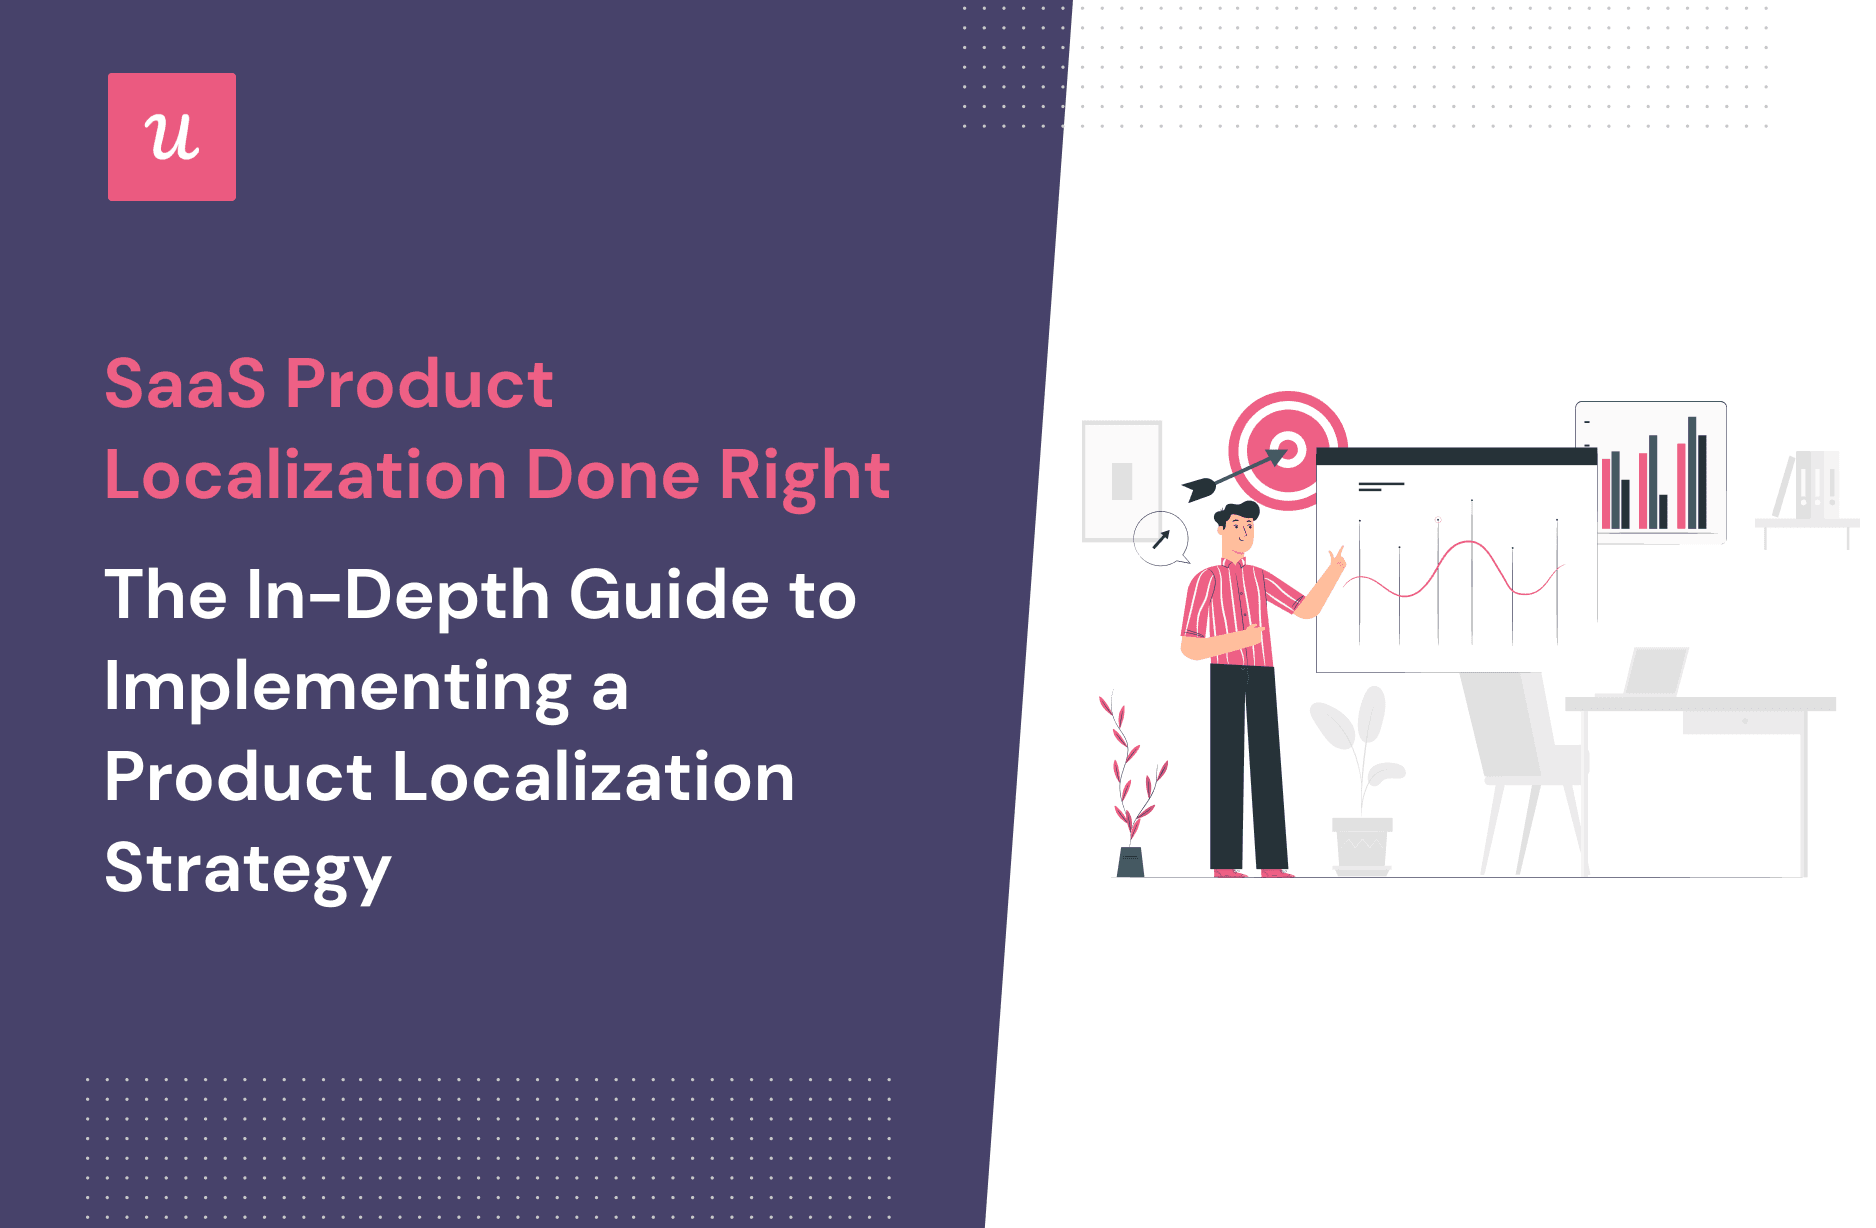 SaaS Product Localization Strategy: The In-Depth Guide